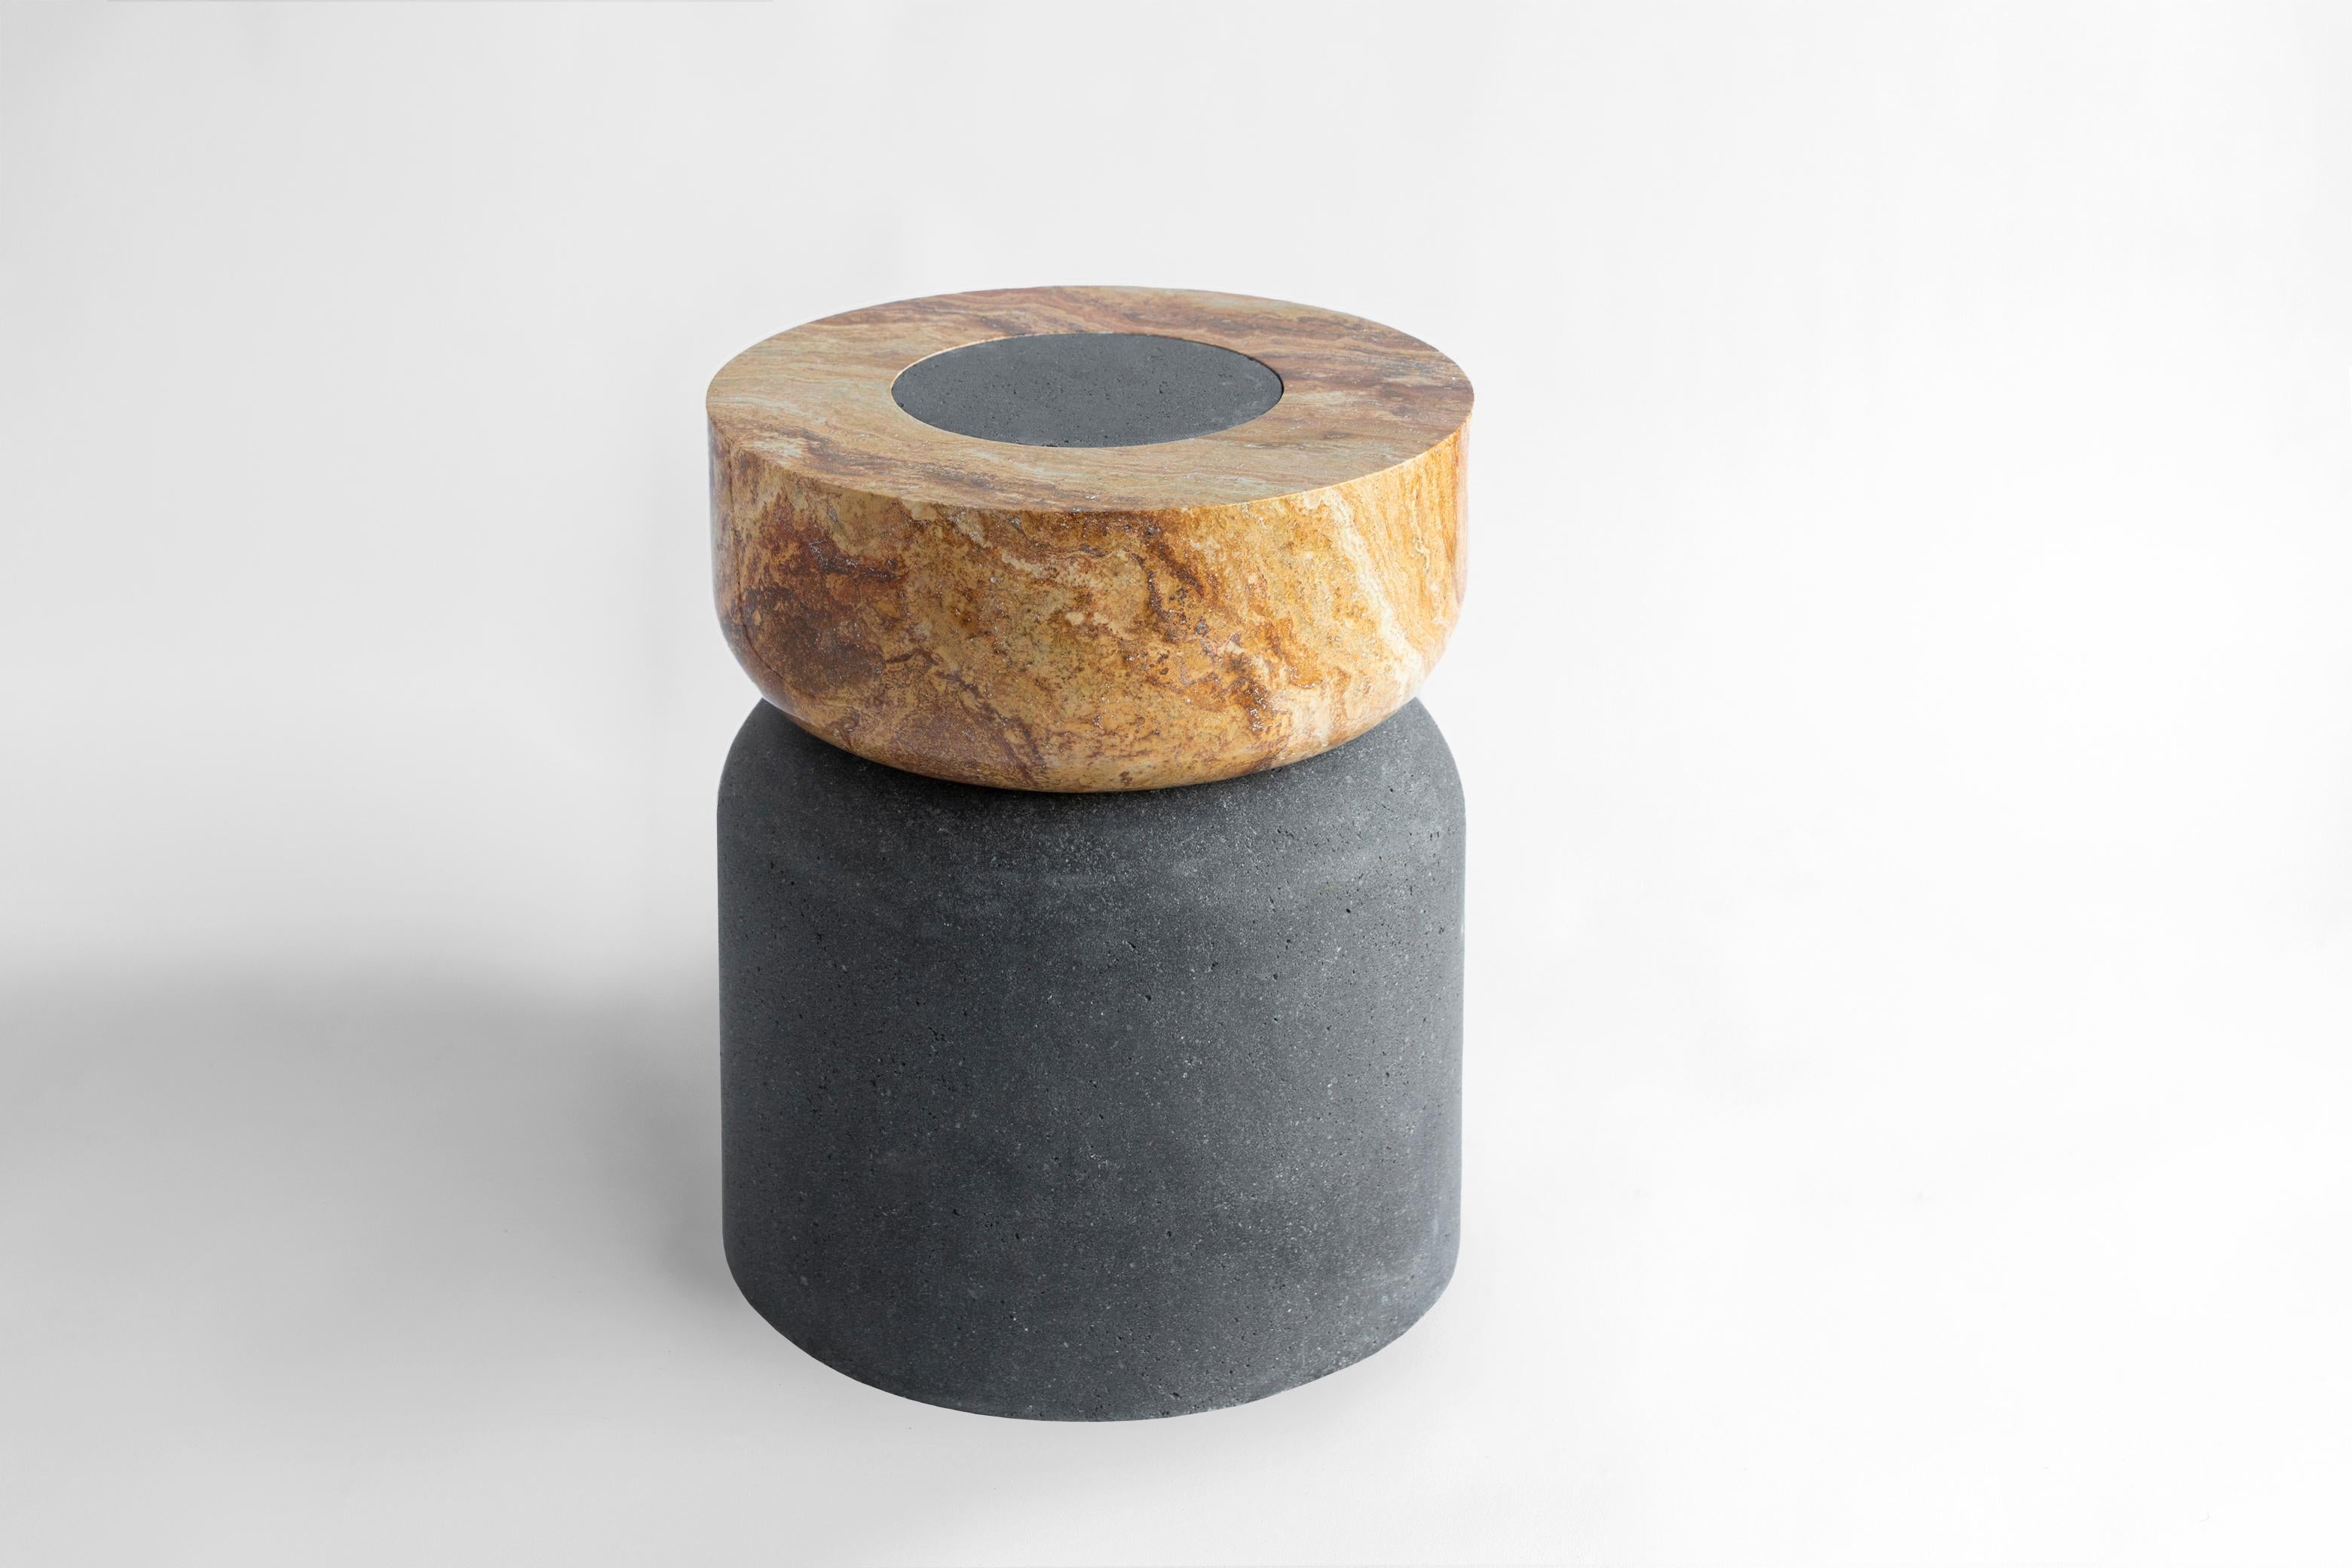 Contemporary Volcanic Shade IV Stool/Table by Sten Studio, Represented by Tuleste Factory For Sale